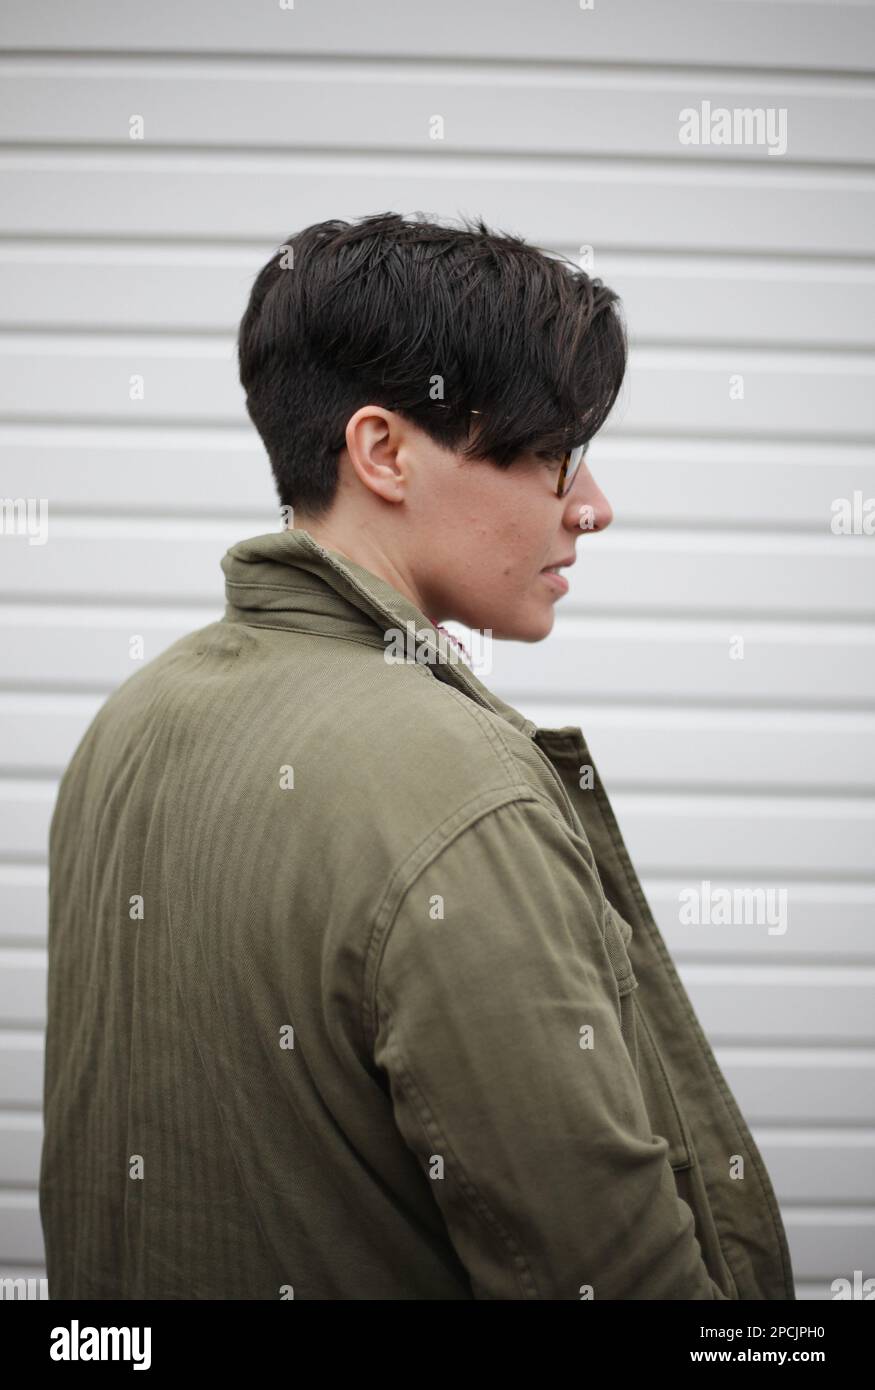 Woman with short hair cut Stock Photo